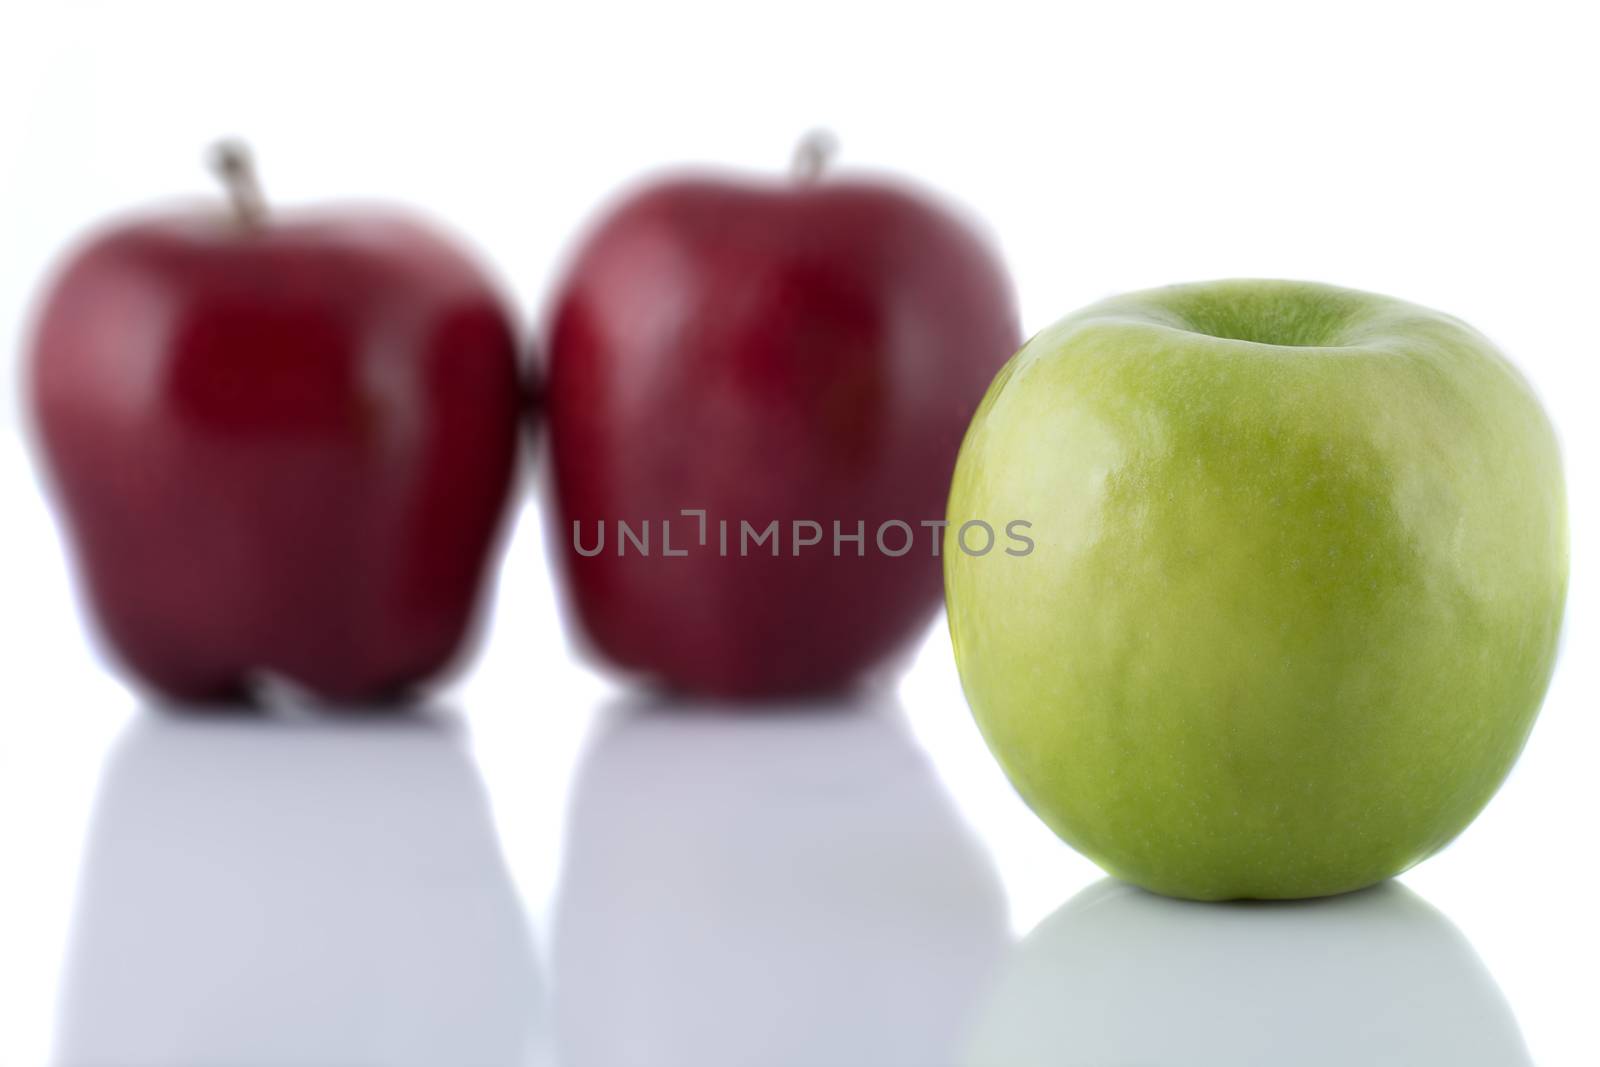 Juicy green apple isolated on a white background.